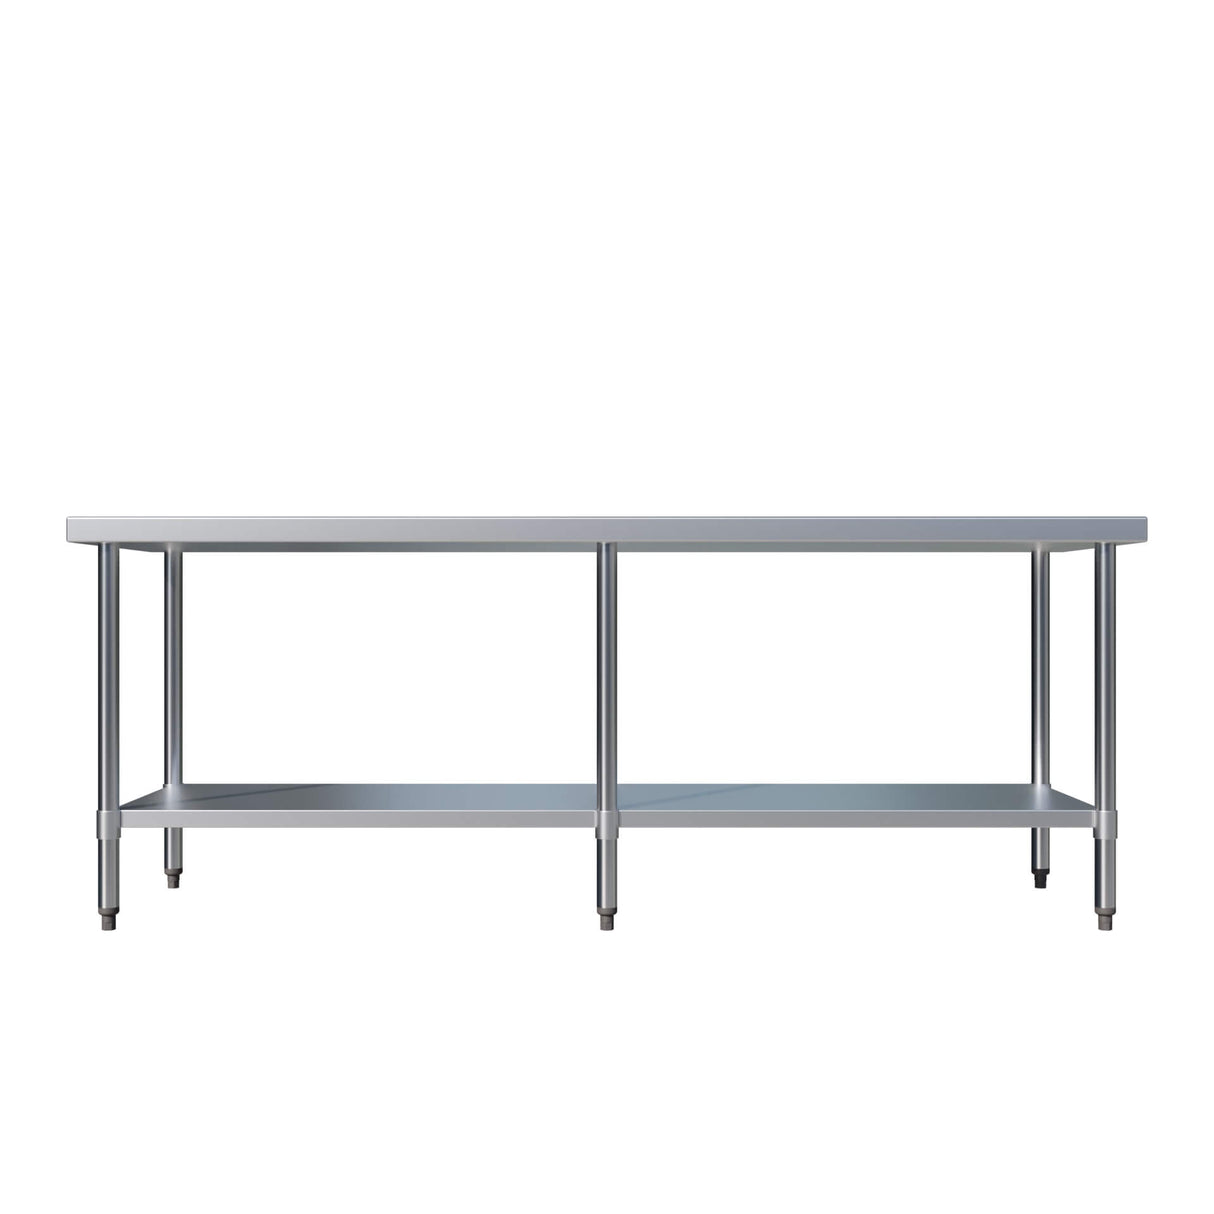 Empire Stainless Steel Centre Prep Table 2100mm Wide - SSCT-210 Stainless Steel Centre Tables Empire   